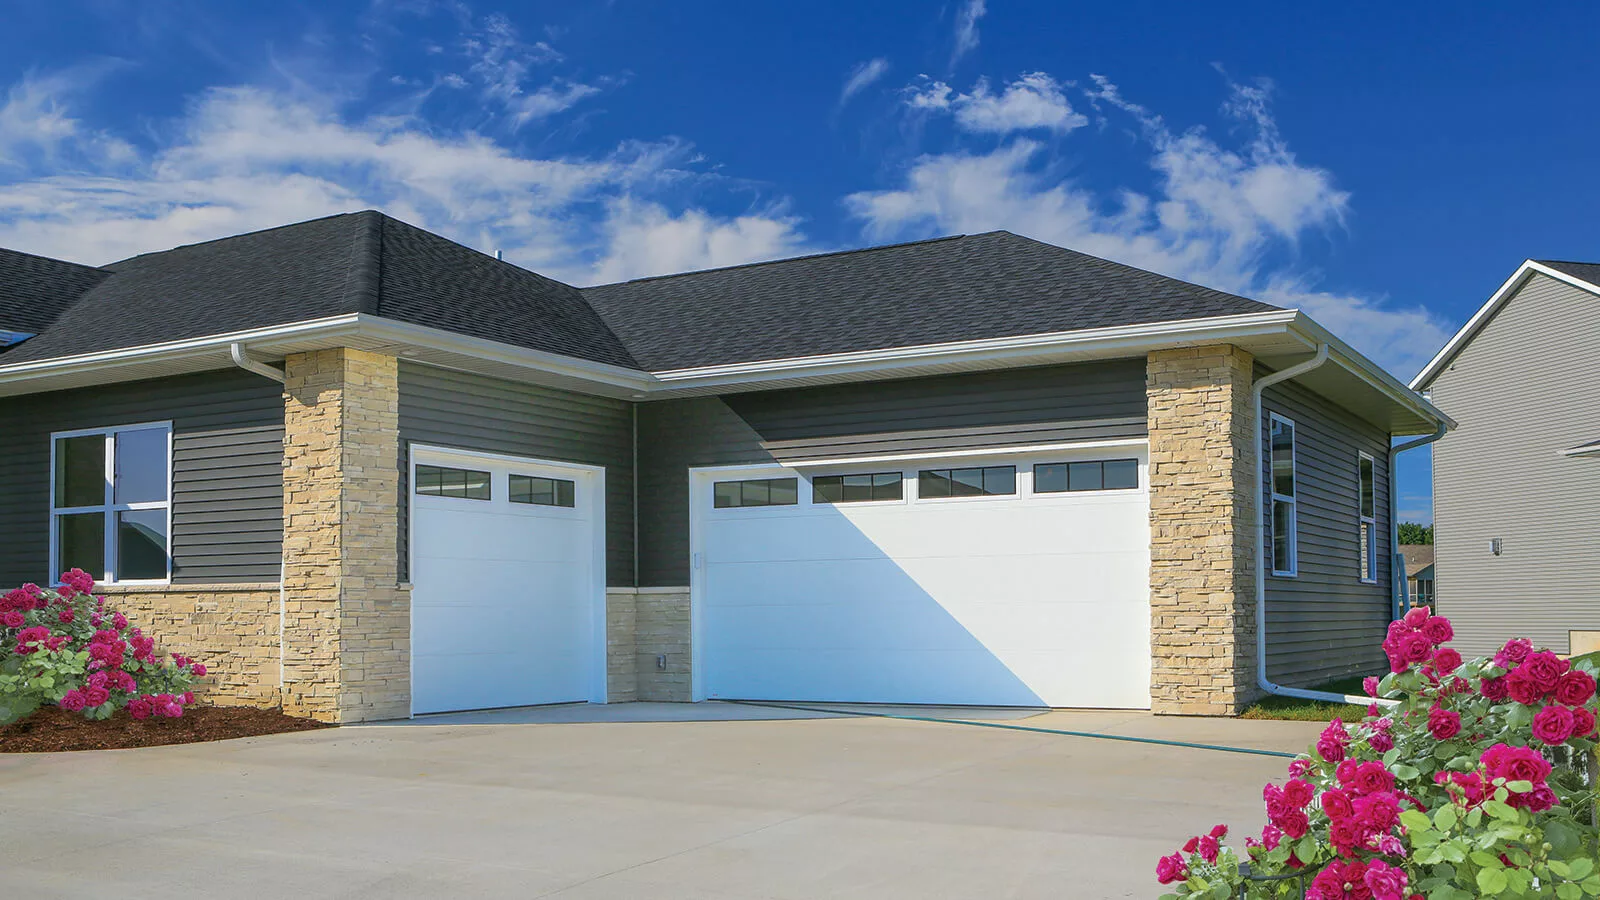 Thermacore® Insulated Garage Doors